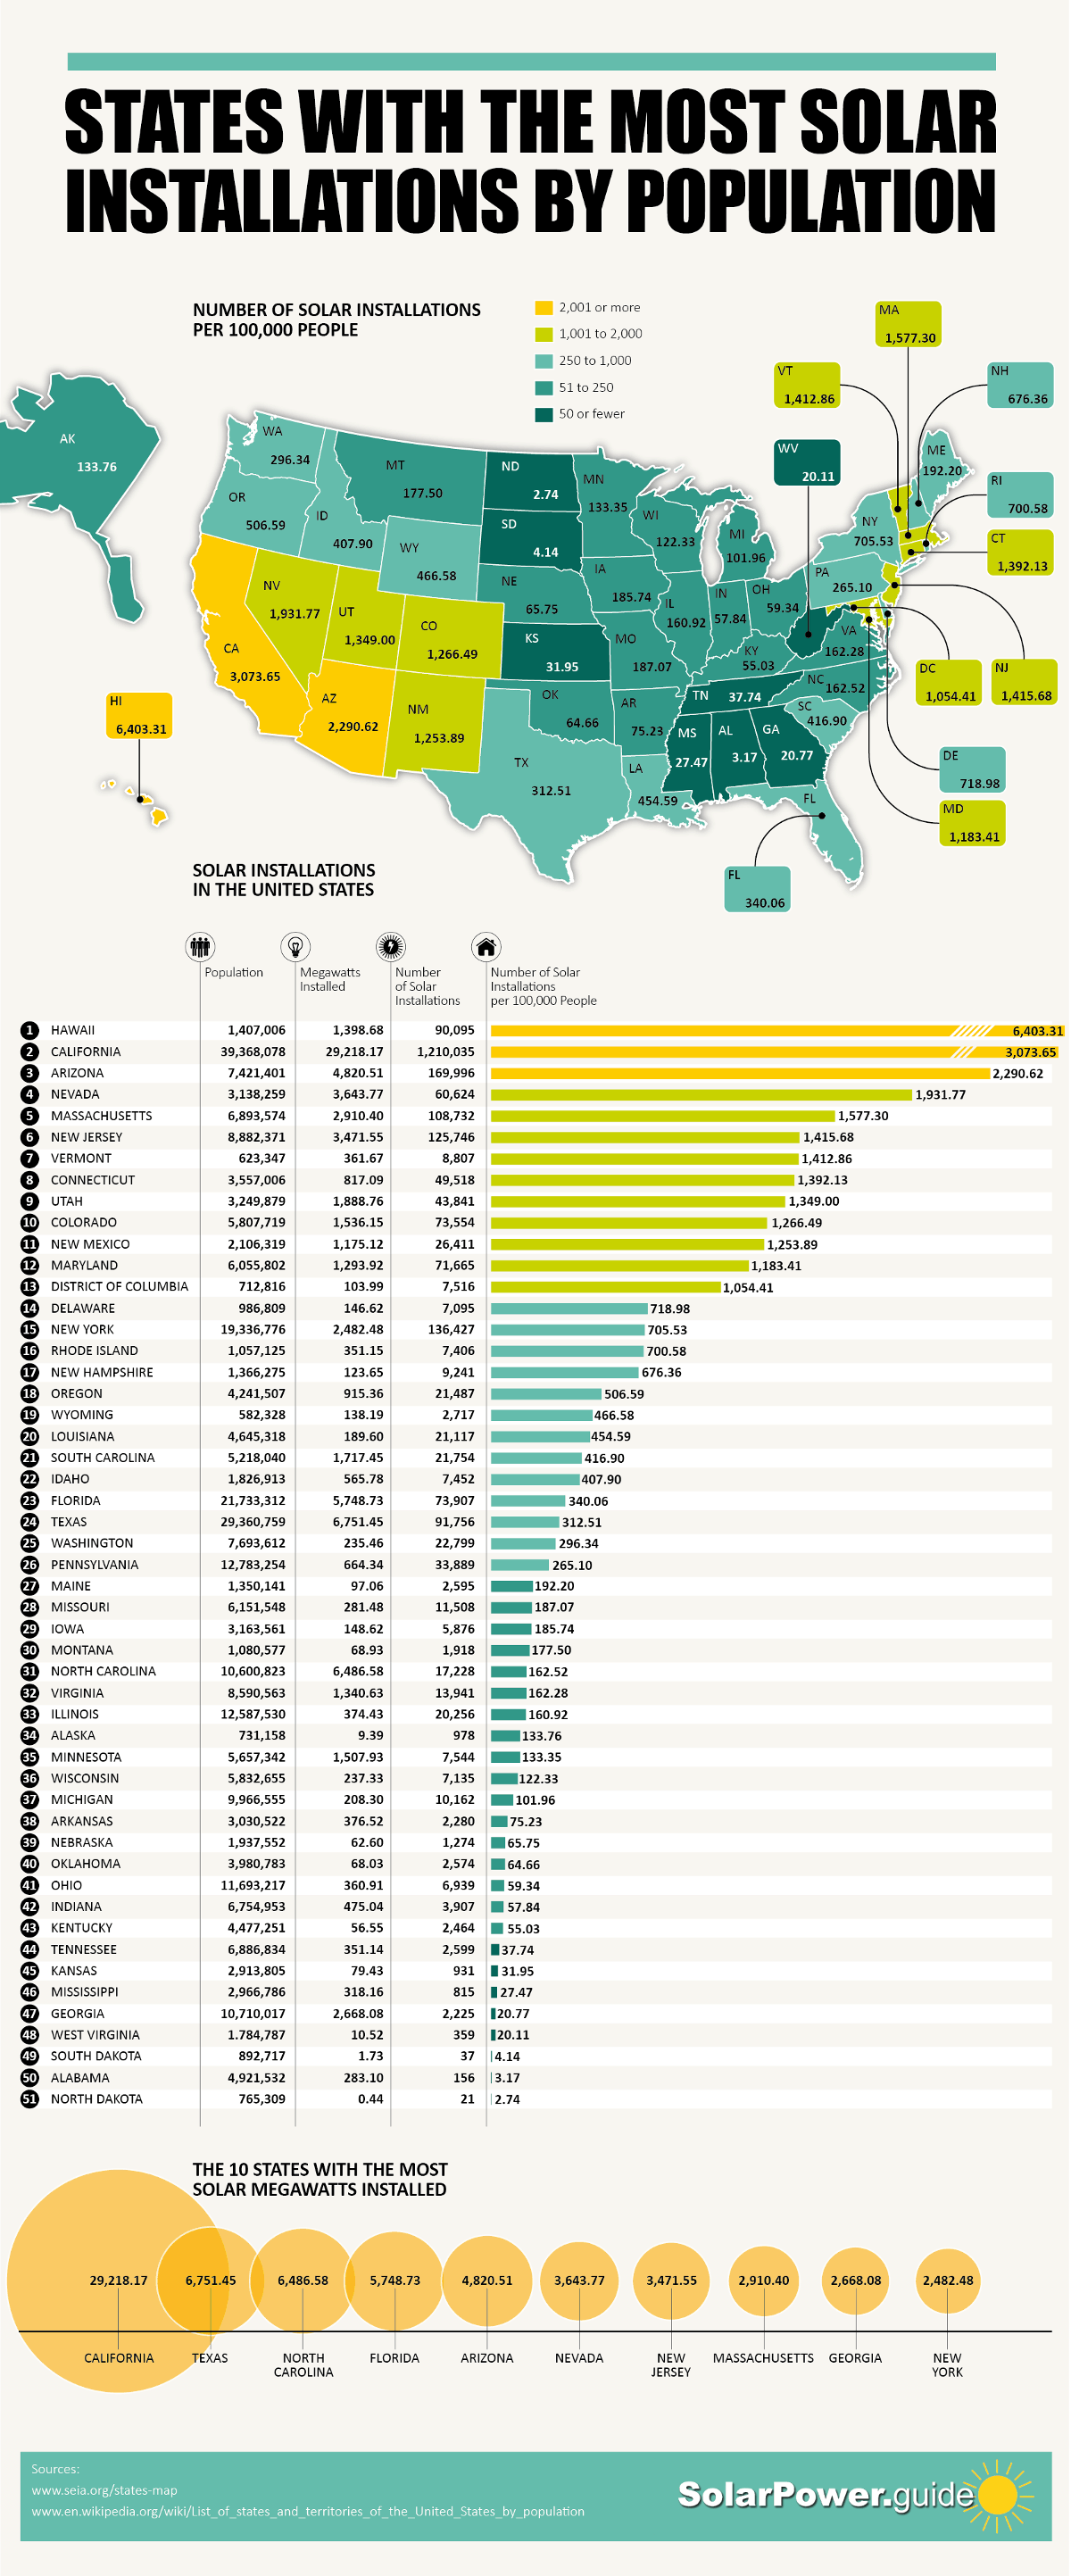 States With the Most Solar Installations by Population